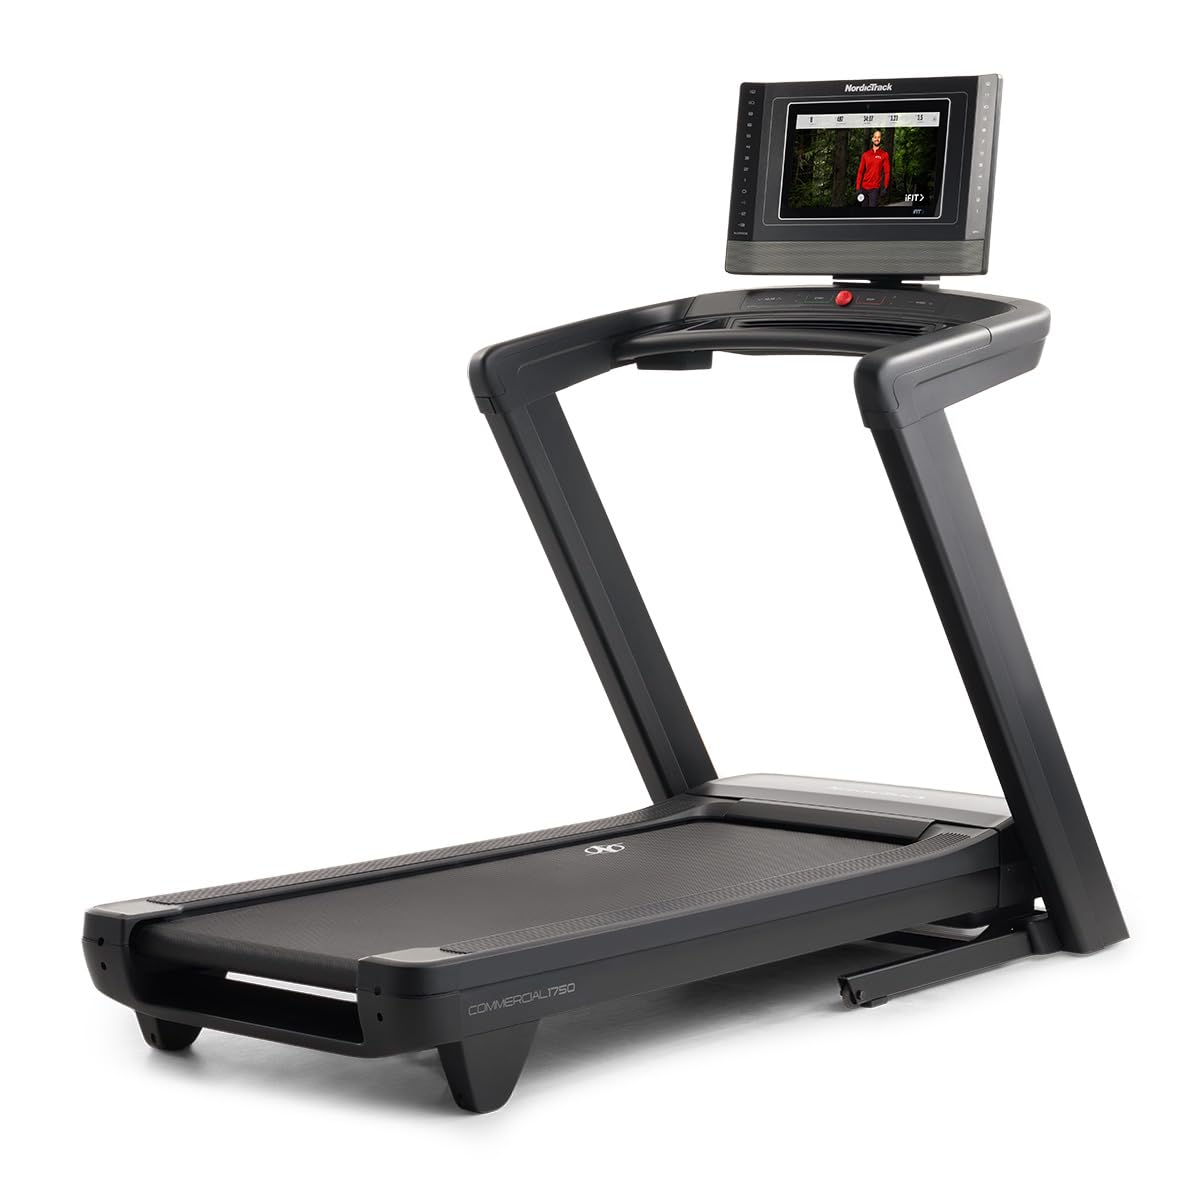 NordicTrack Commercial Series 1250, 1750, 2450_ Expertly Engineered Foldable Treadmill, Treadmills for Home Use, Walking Treadmill with Incline, Superior Interactive Training Experience>